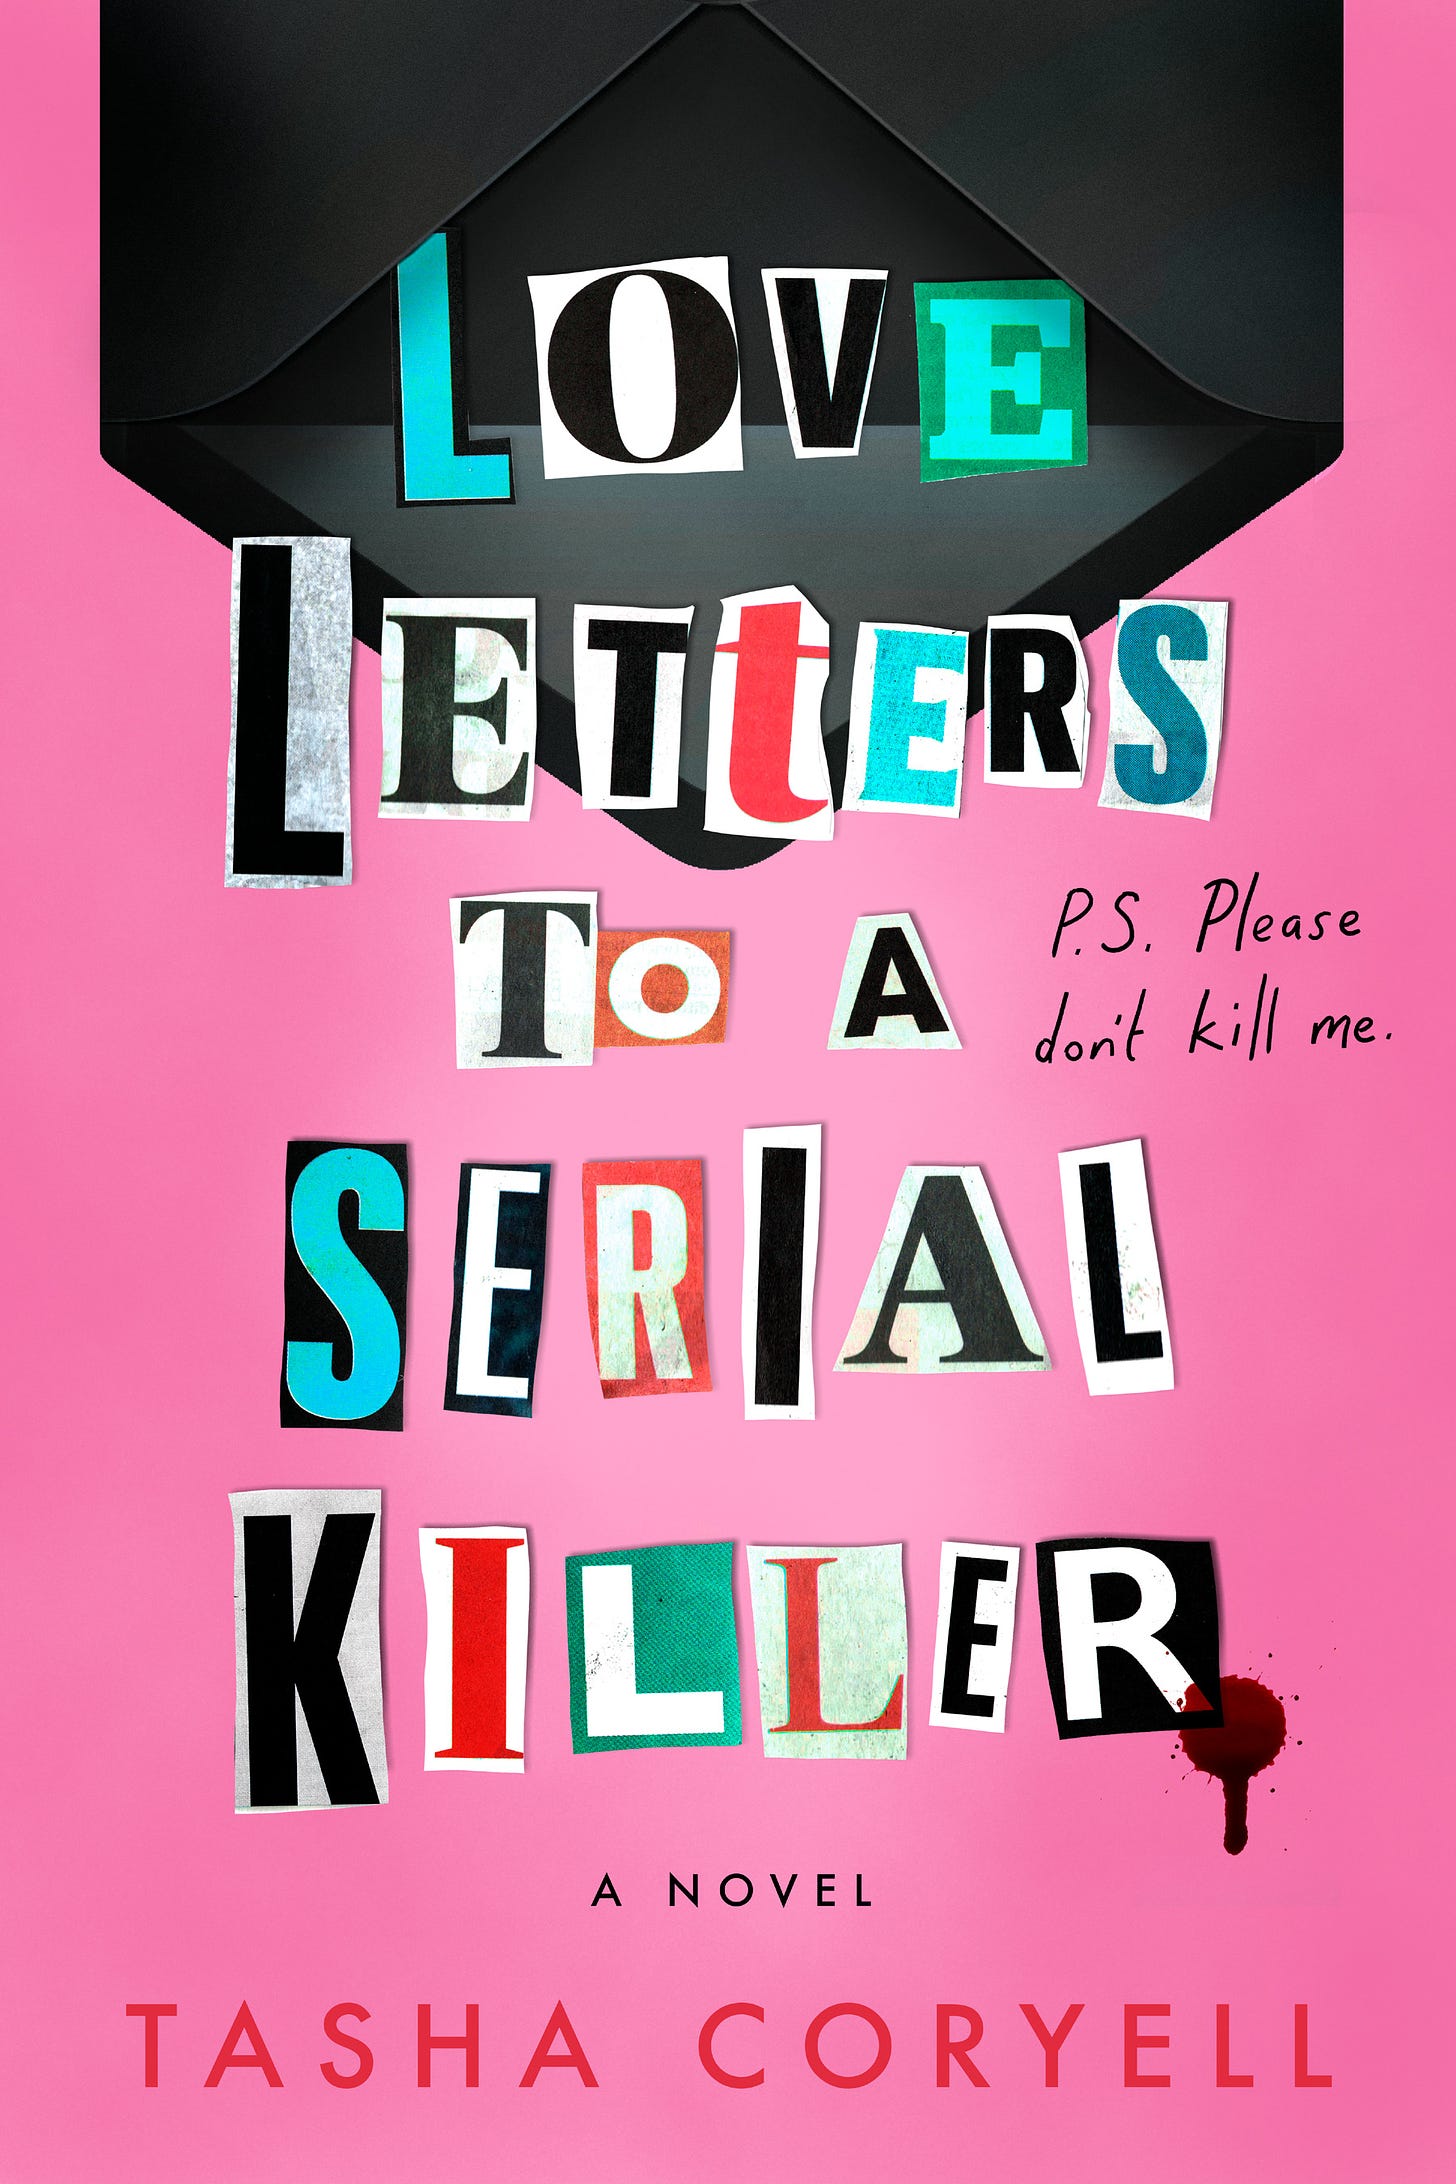 Love Letters to a Serial Killer by Tasha Coryell | Goodreads